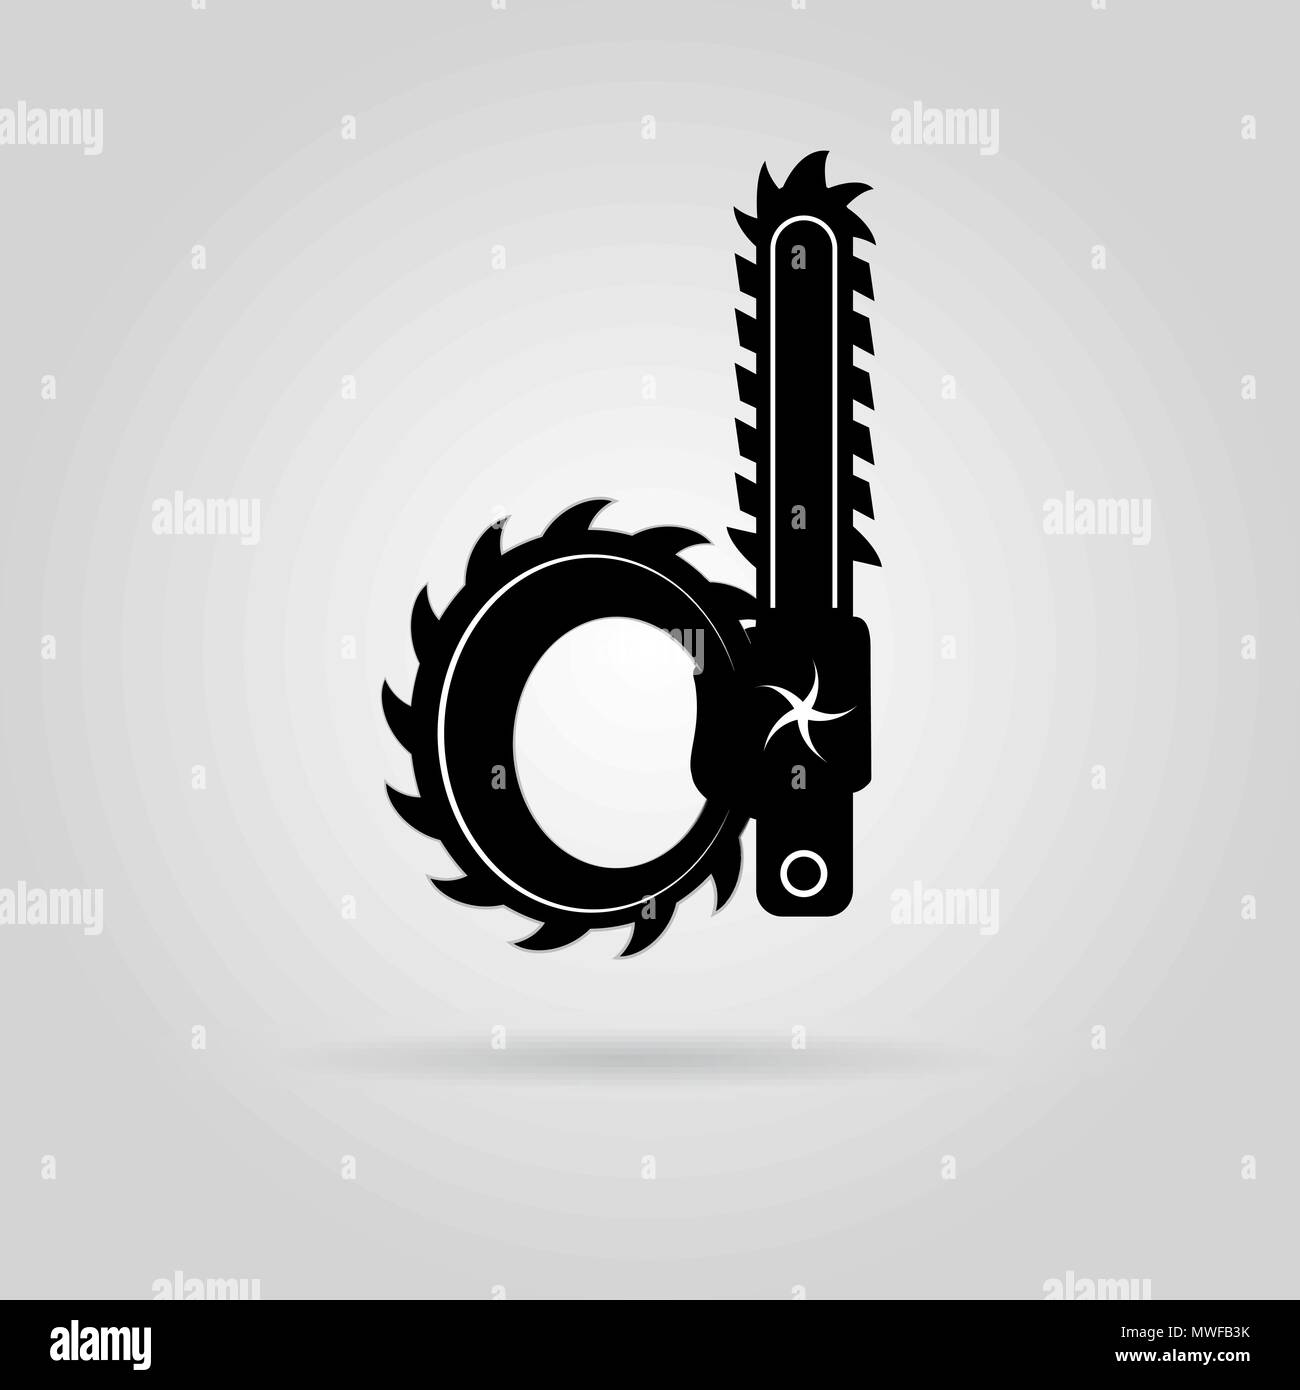 Lowercase letter d as chainsaw - creative logotype design for carpenter business Stock Vector